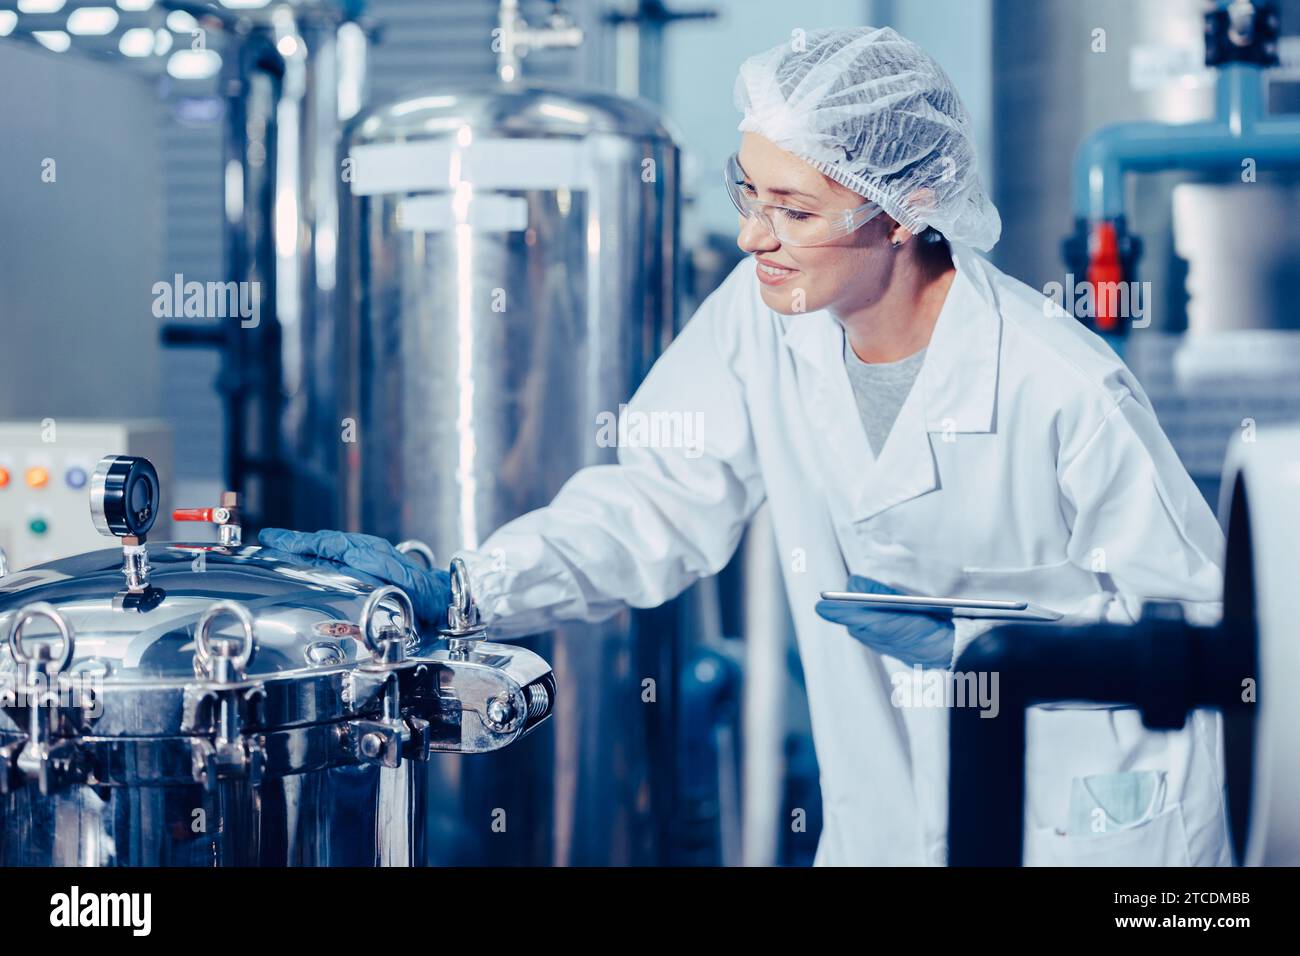 hygiene staff worker in foods and drinks clean factory. working women in water plant industry quality control check. Stock Photo